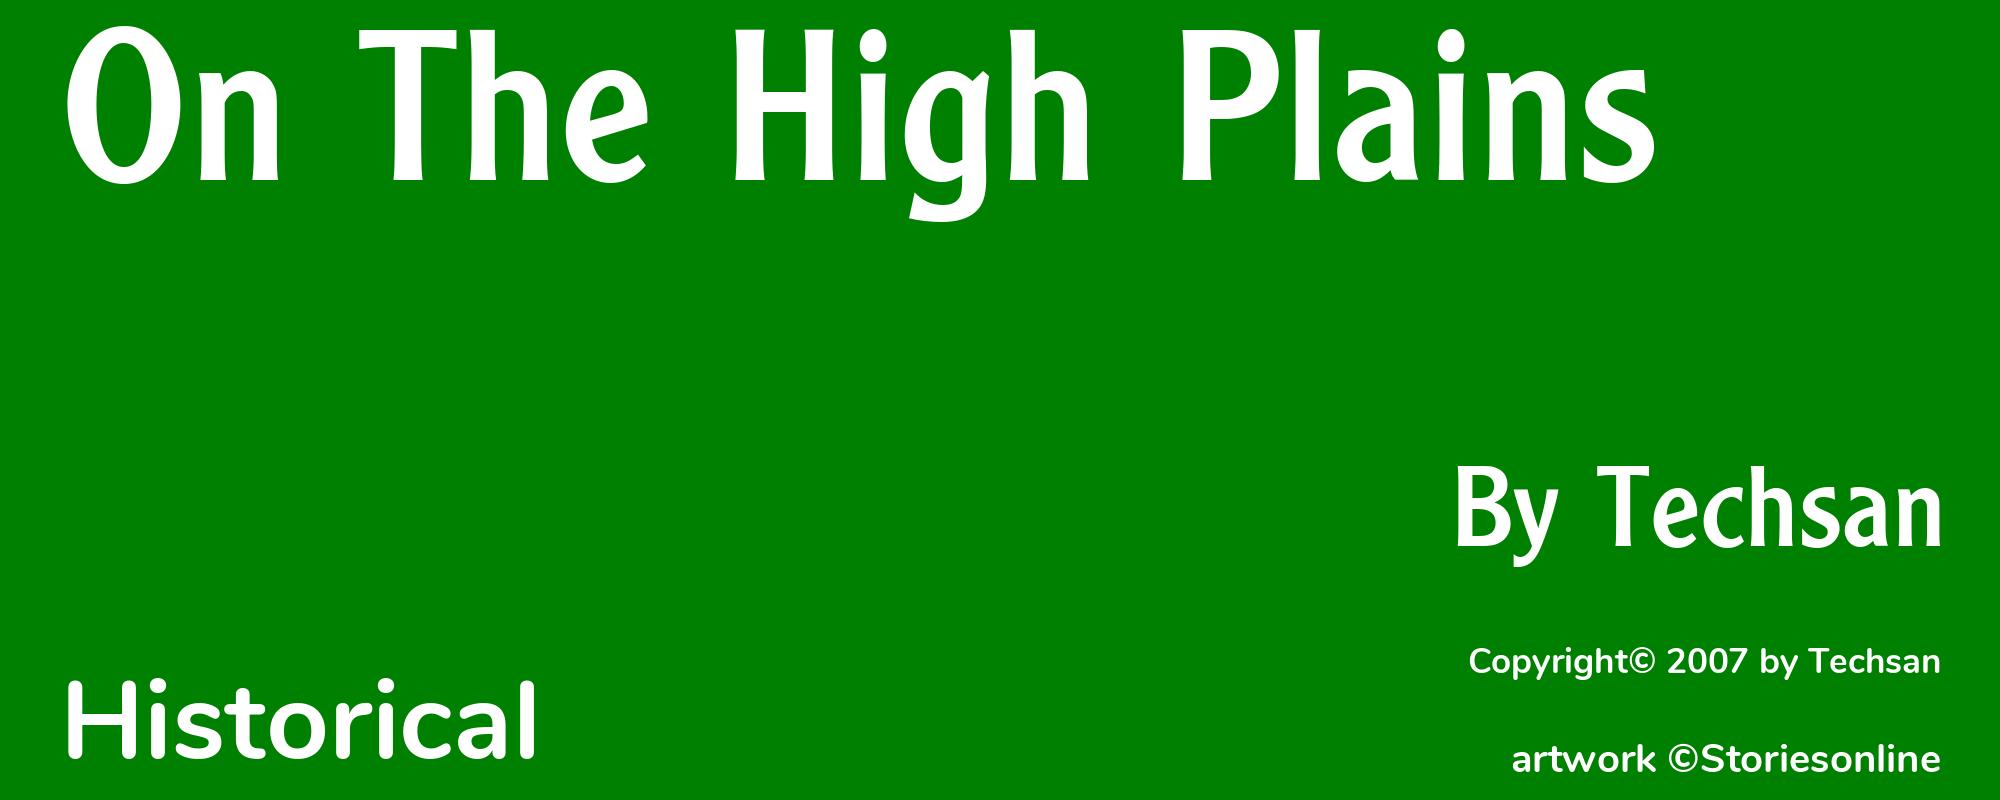 On The High Plains - Cover